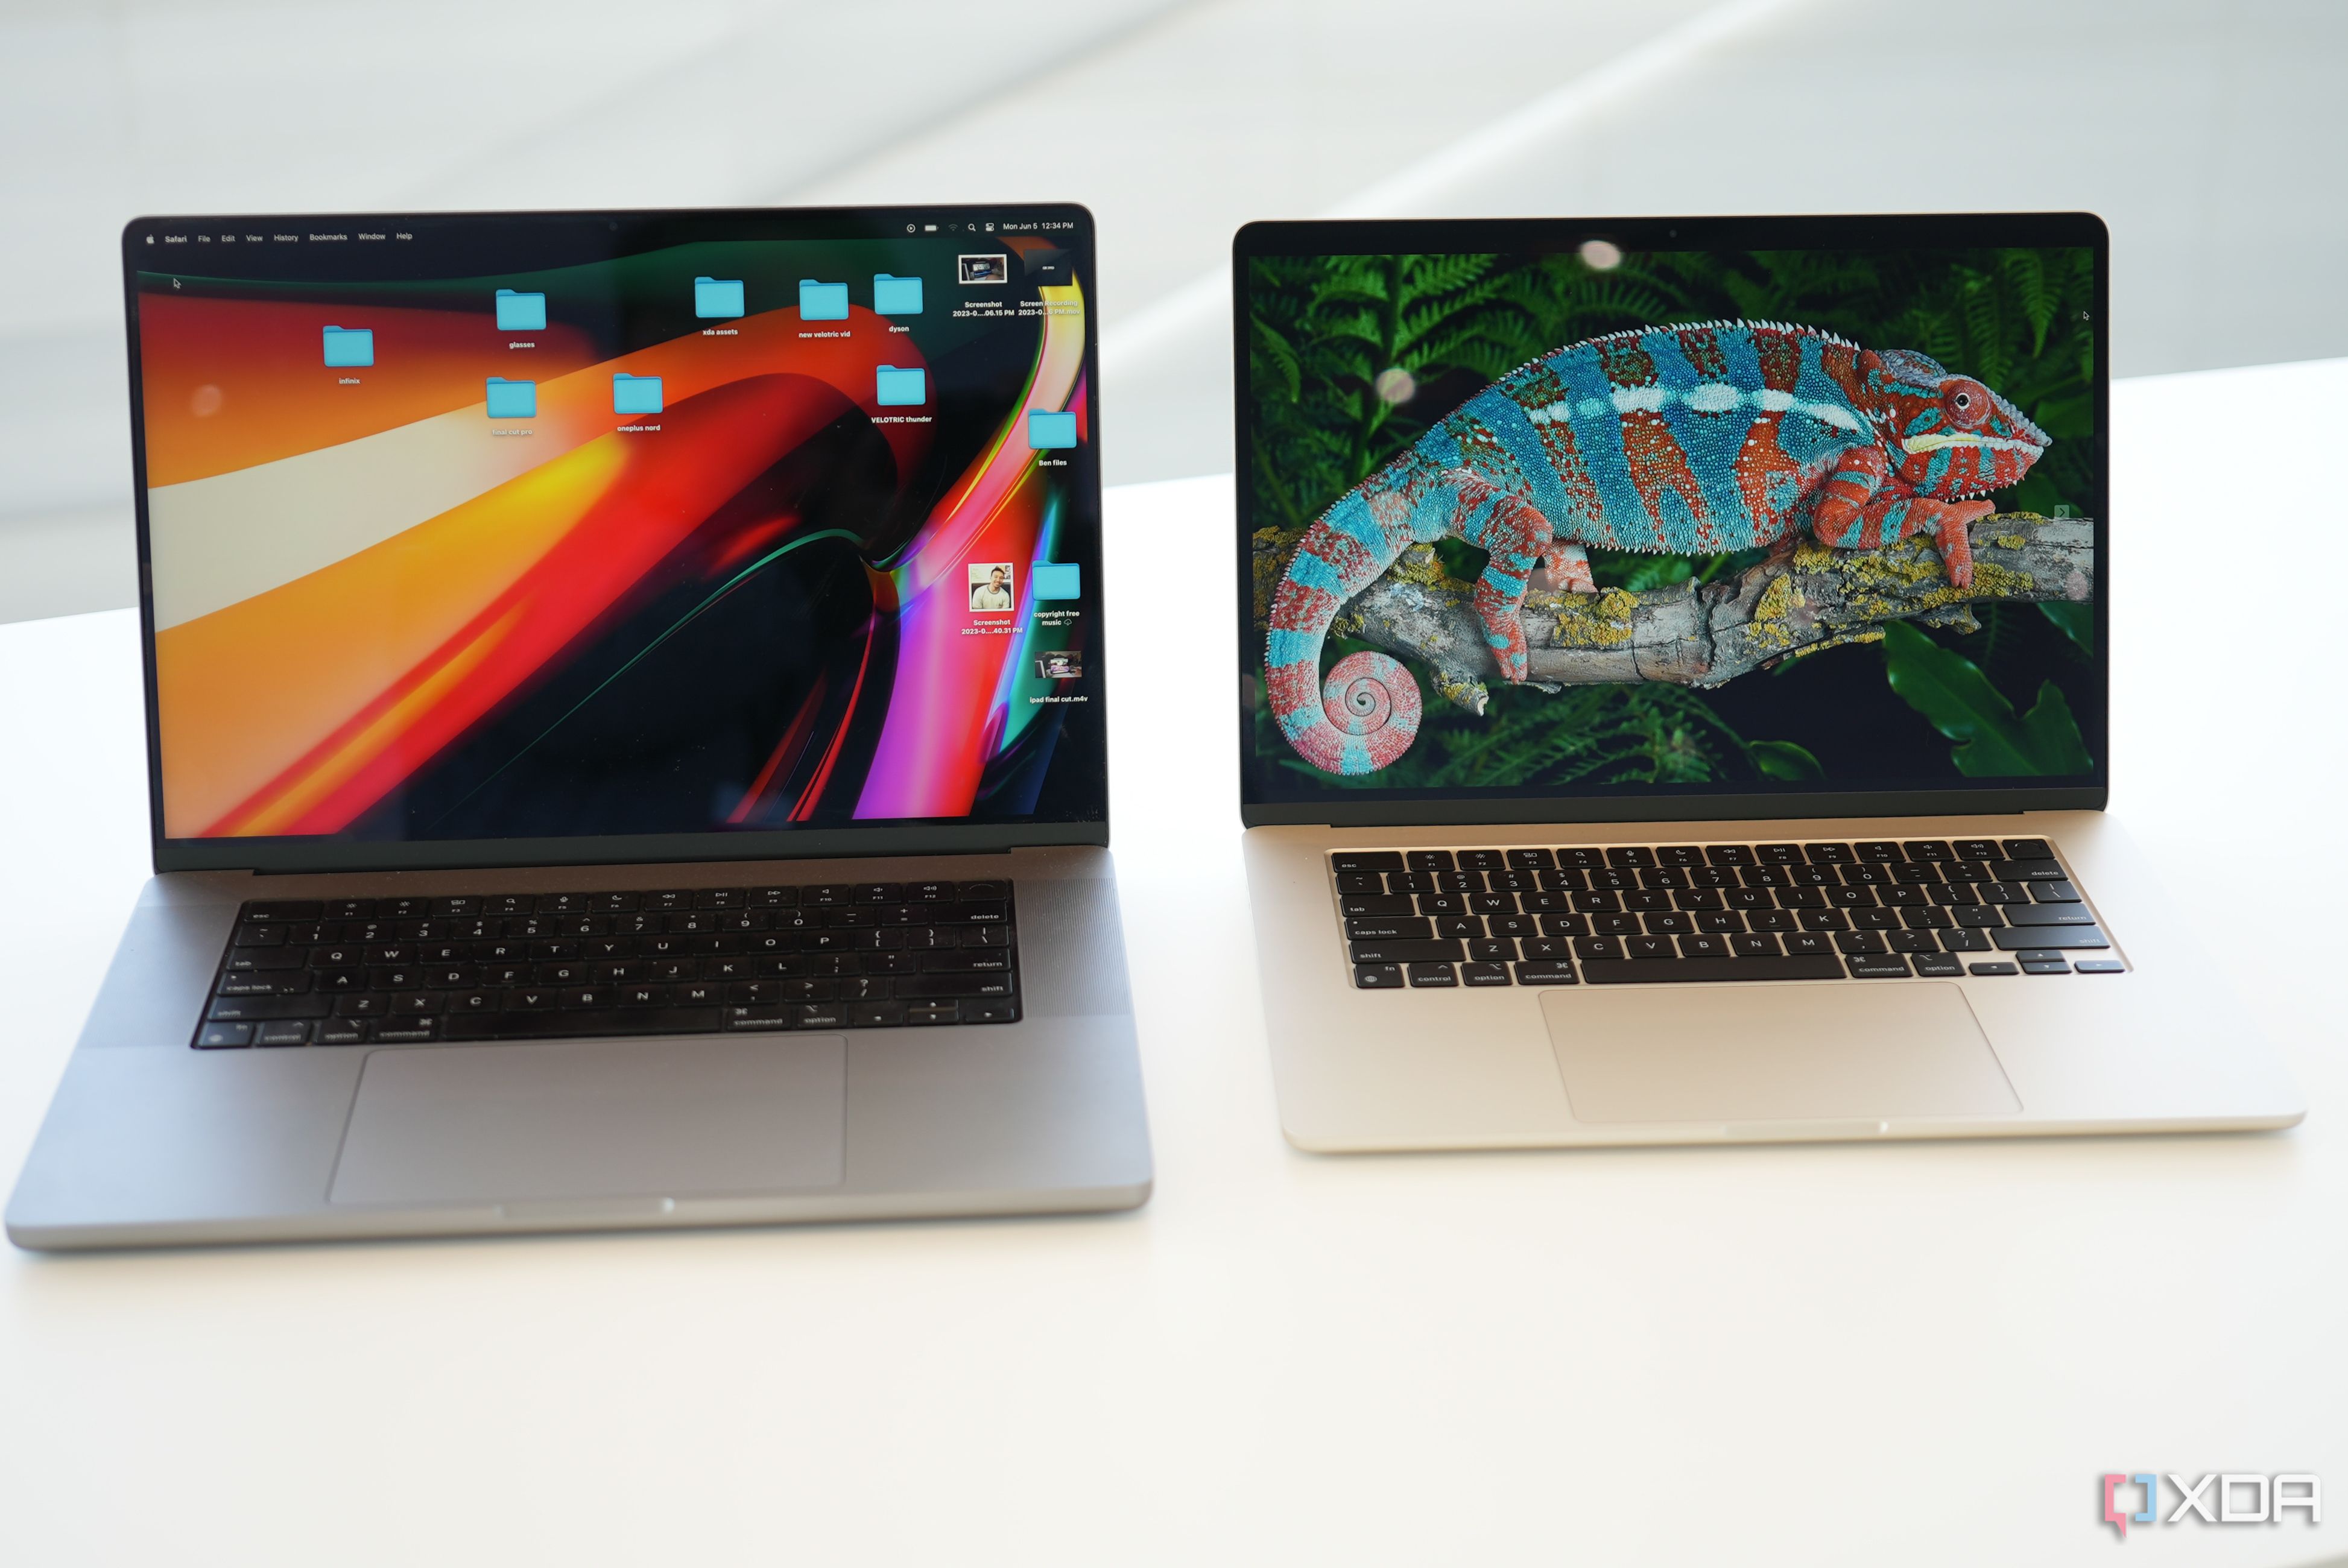 16-inch MacBook Pro on the left, 15-inch MacBook Air on the right